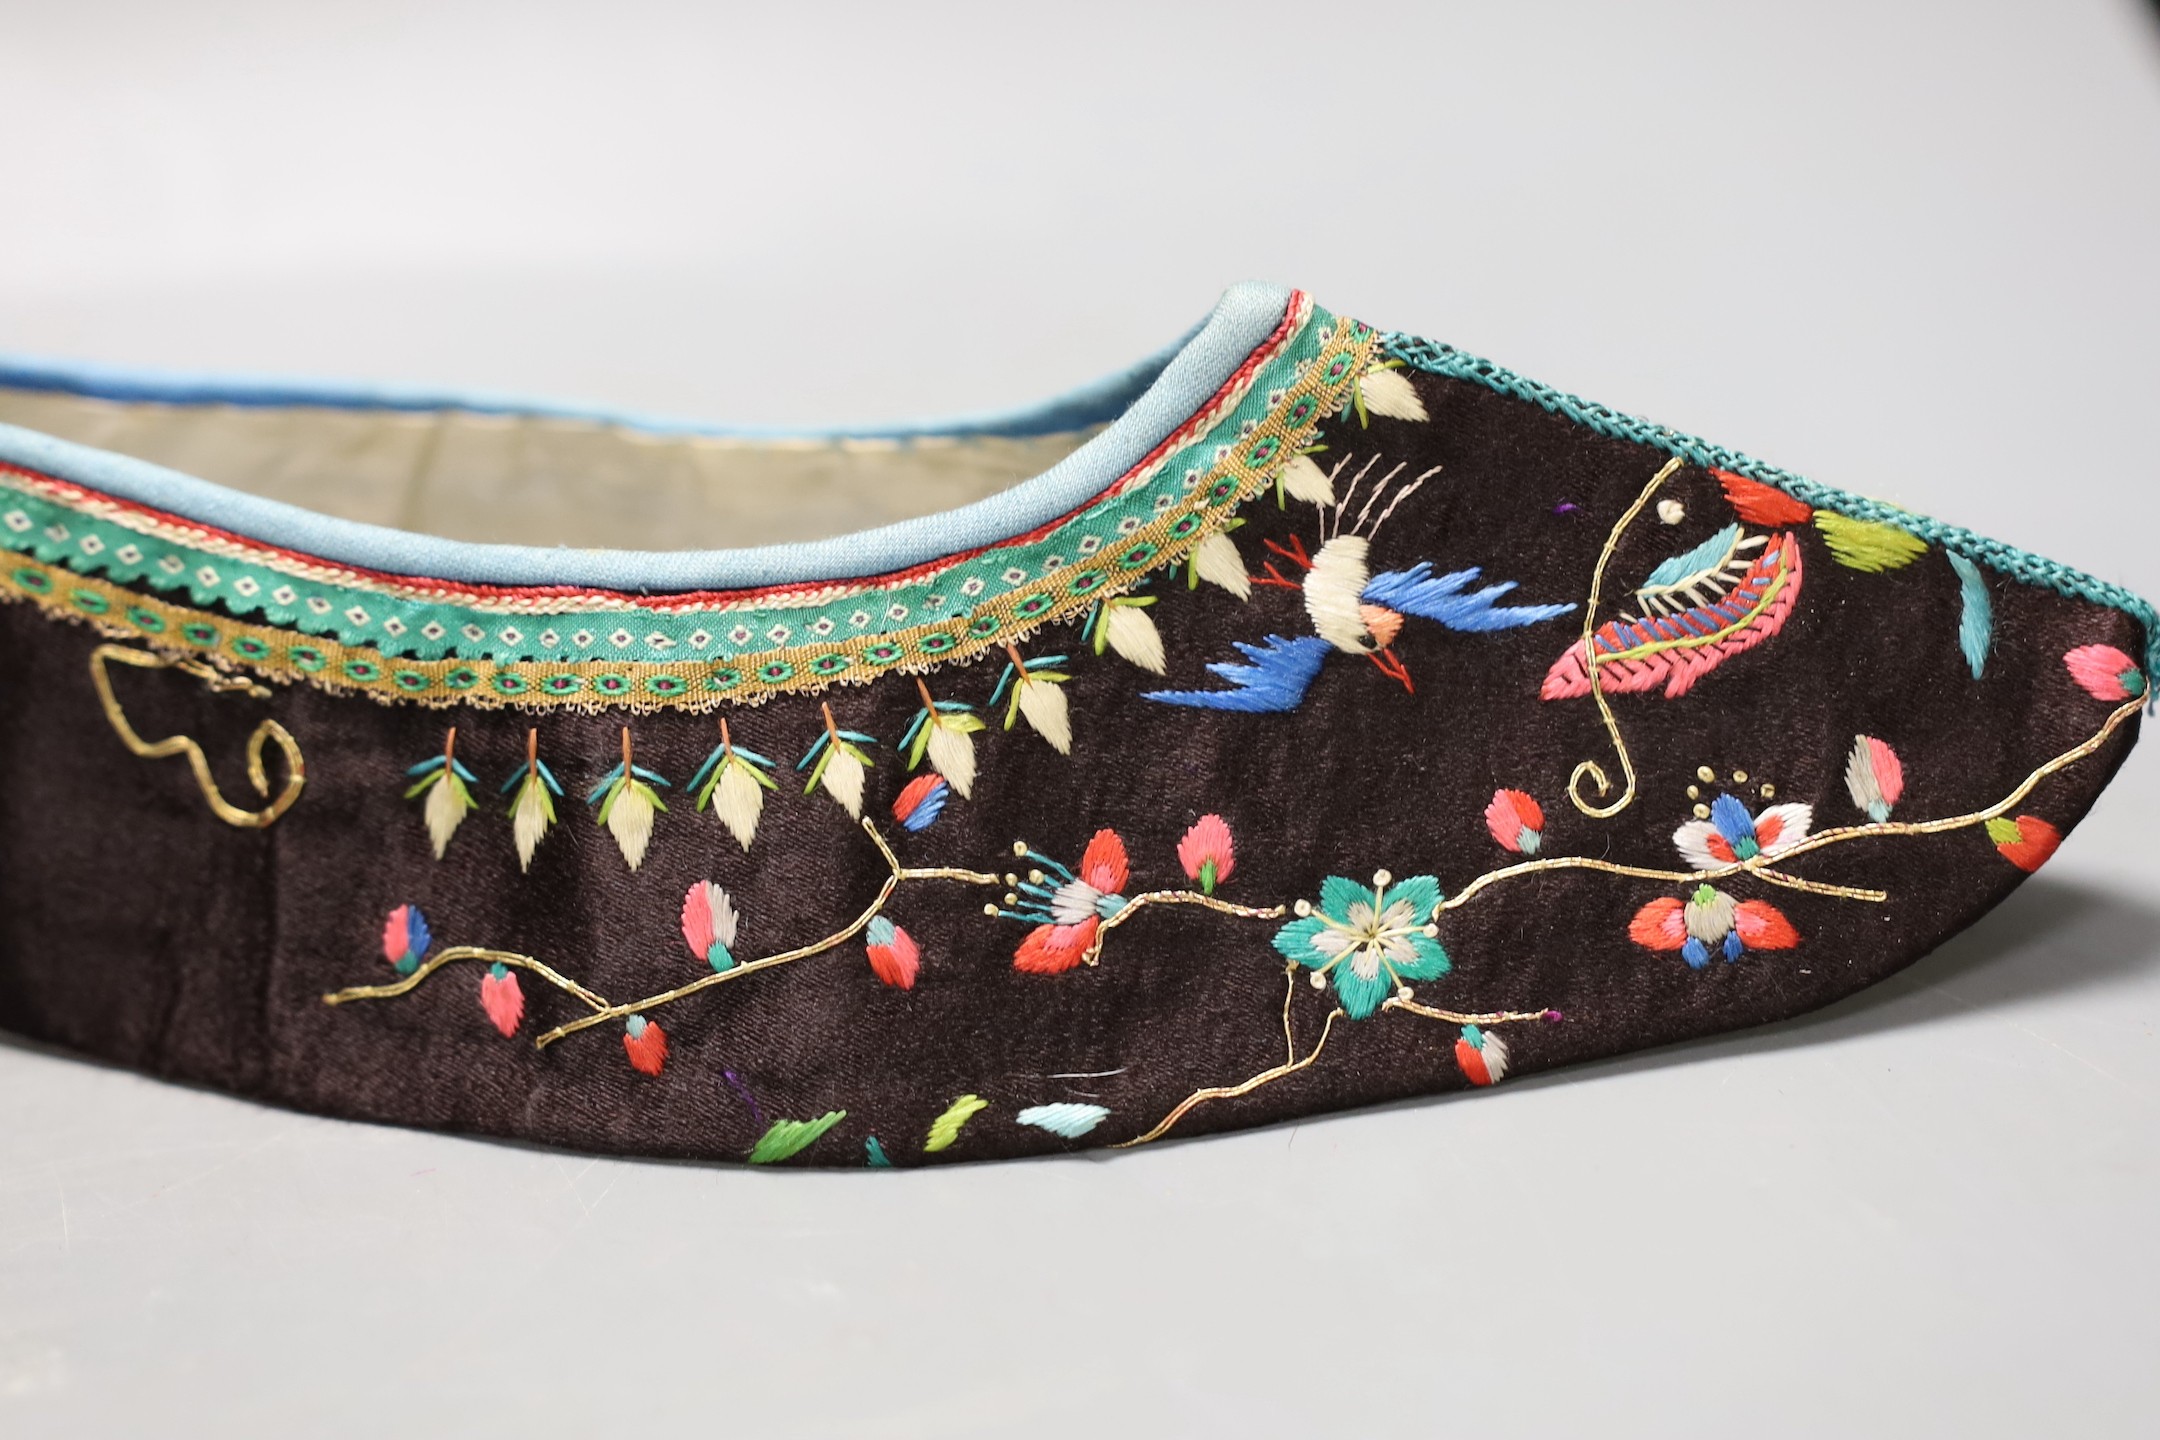 A pair of Chinese embroidered silk shoes, upper section only